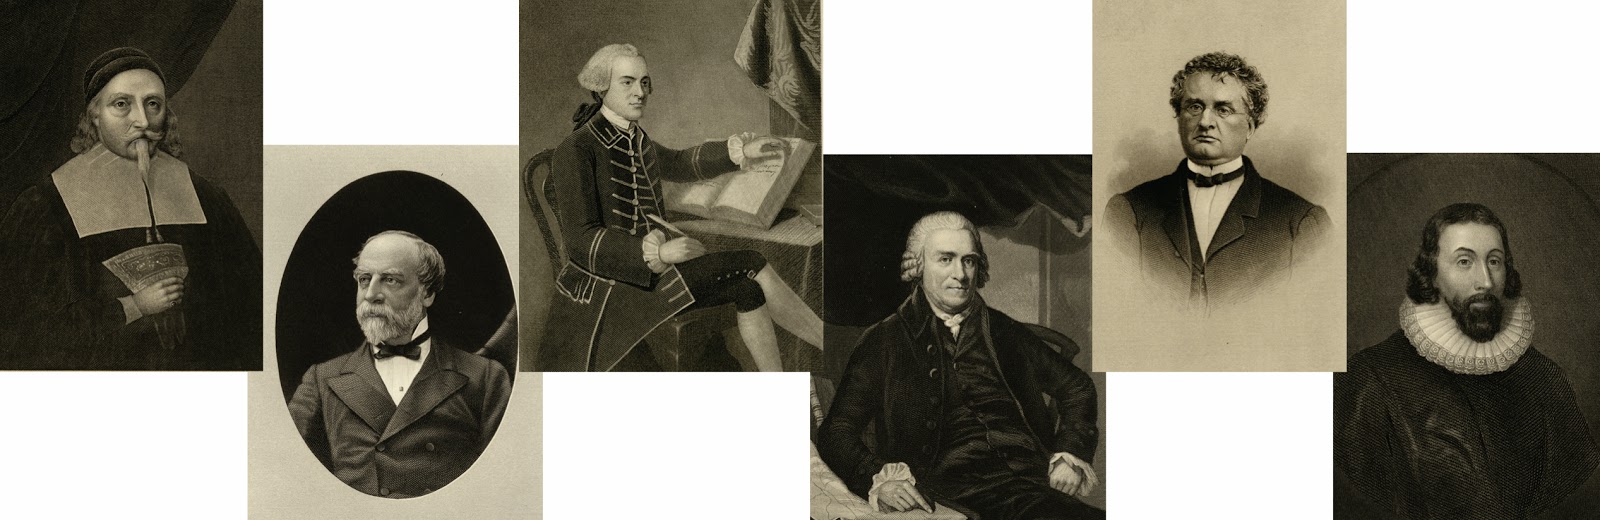 State Library Of Massachusetts Images Of Governors Of Massachusetts